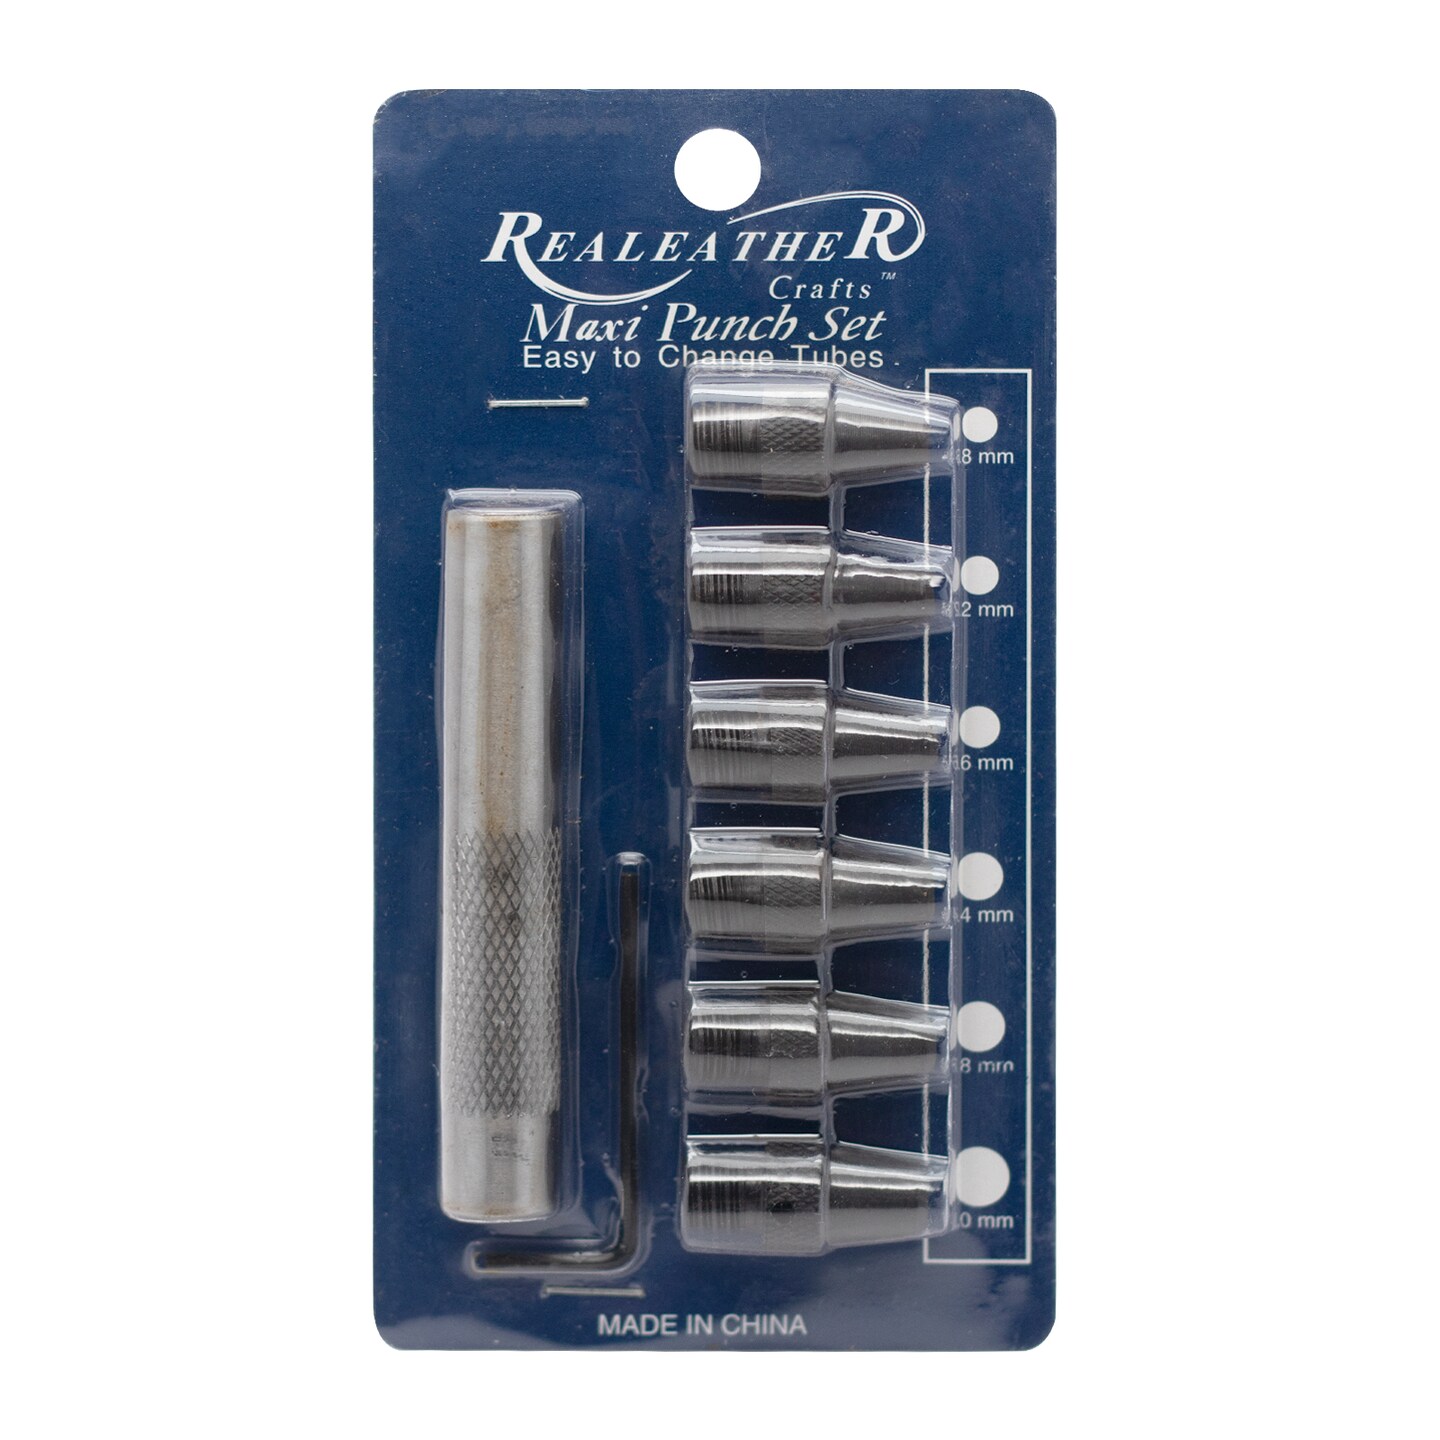 Realeather Leather Punch Set, Maxi, 8-Pieces